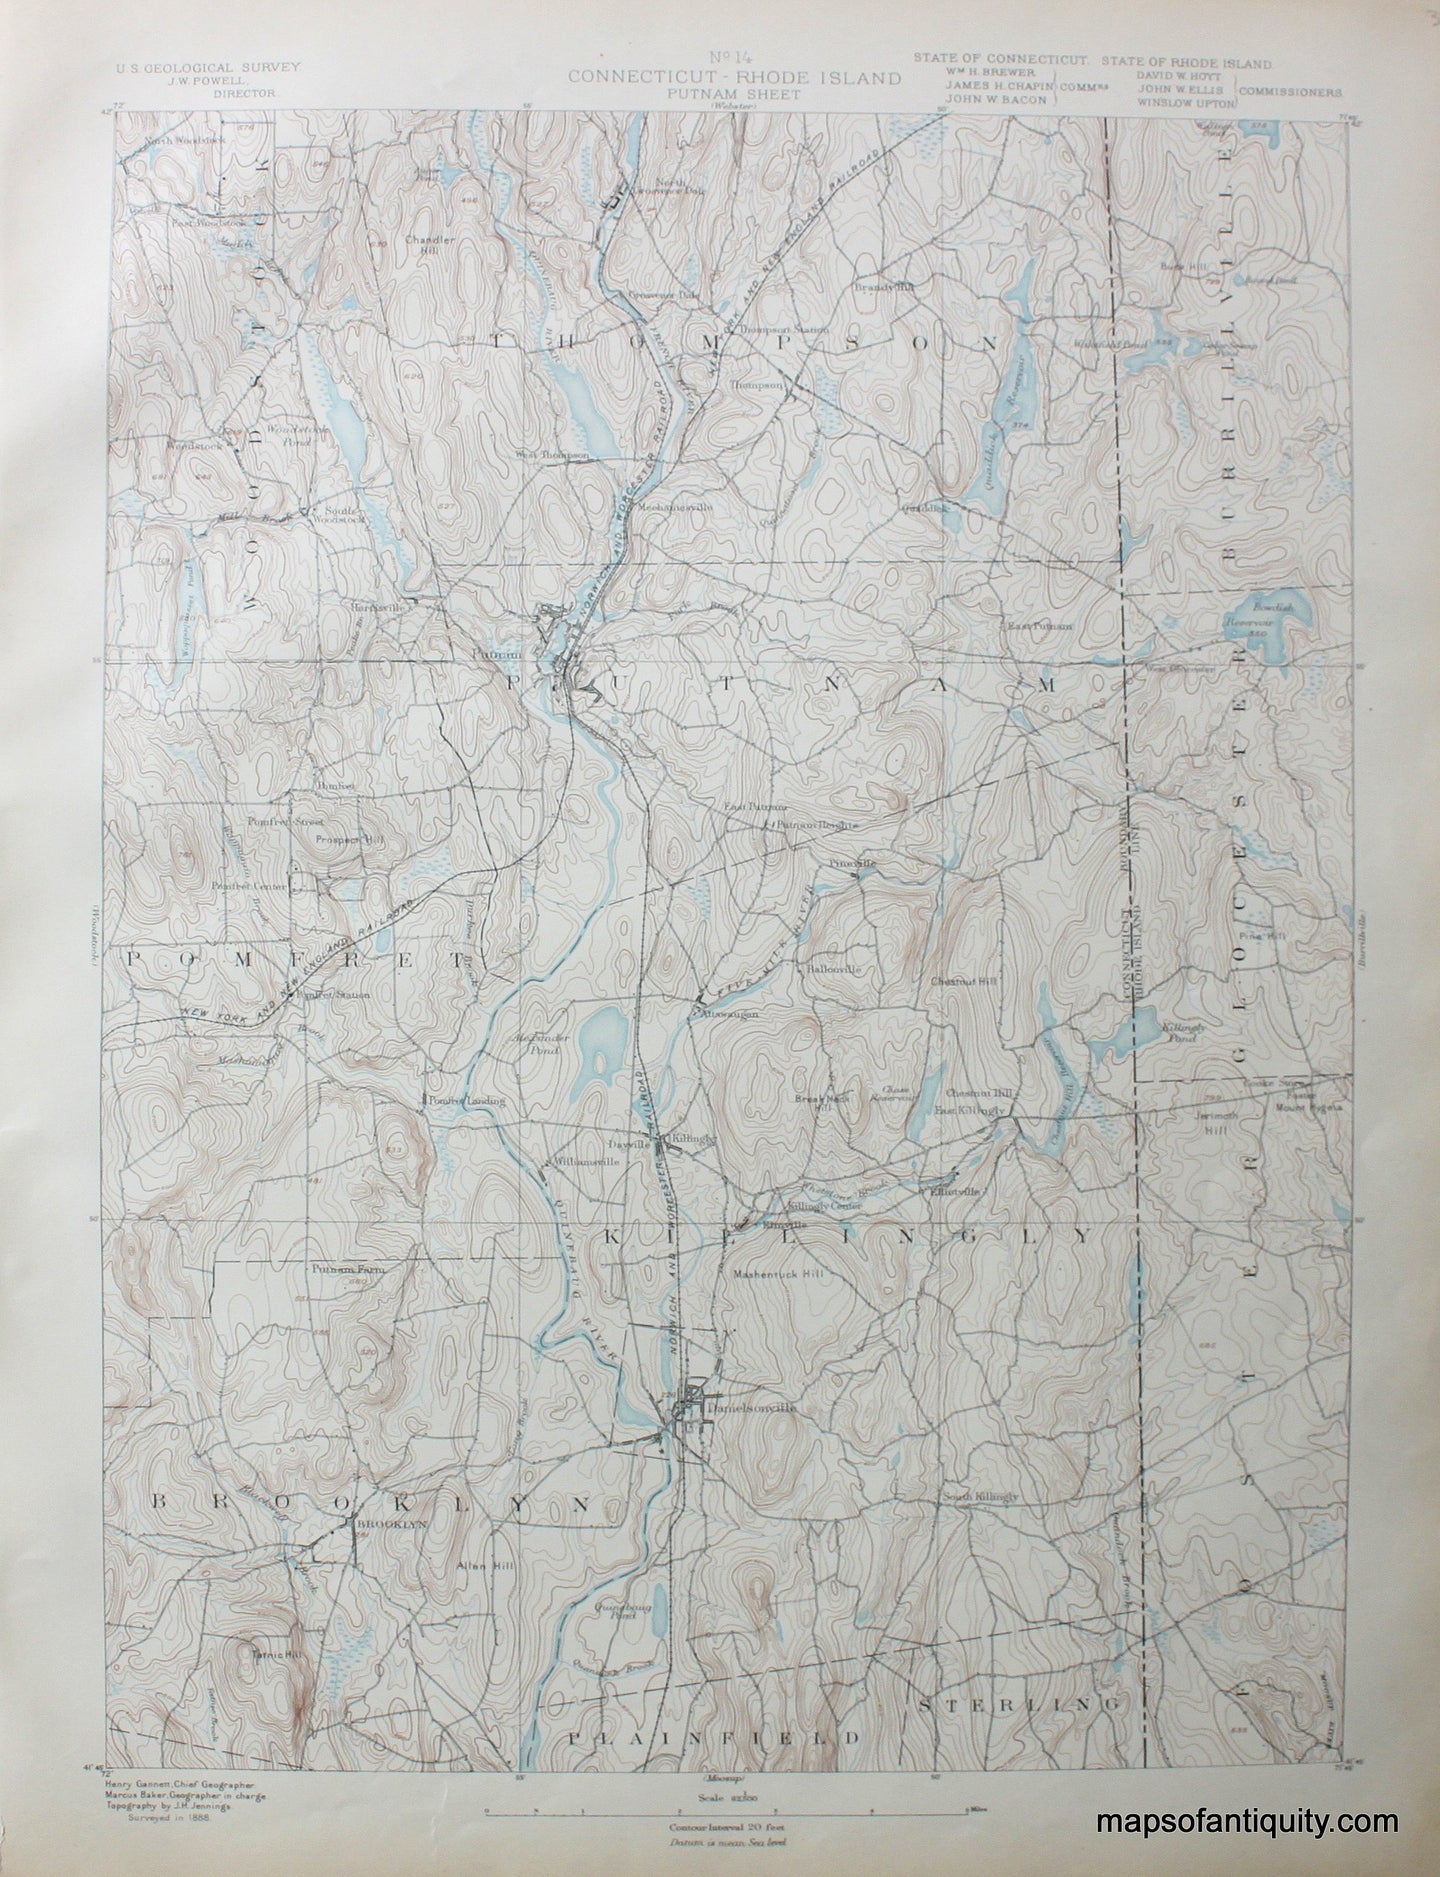 Topographical-Map-CT-Putnam-sheet-antique-topo-map-United-States-Connecticut-1888-USGS-Maps-Of-Antiquity